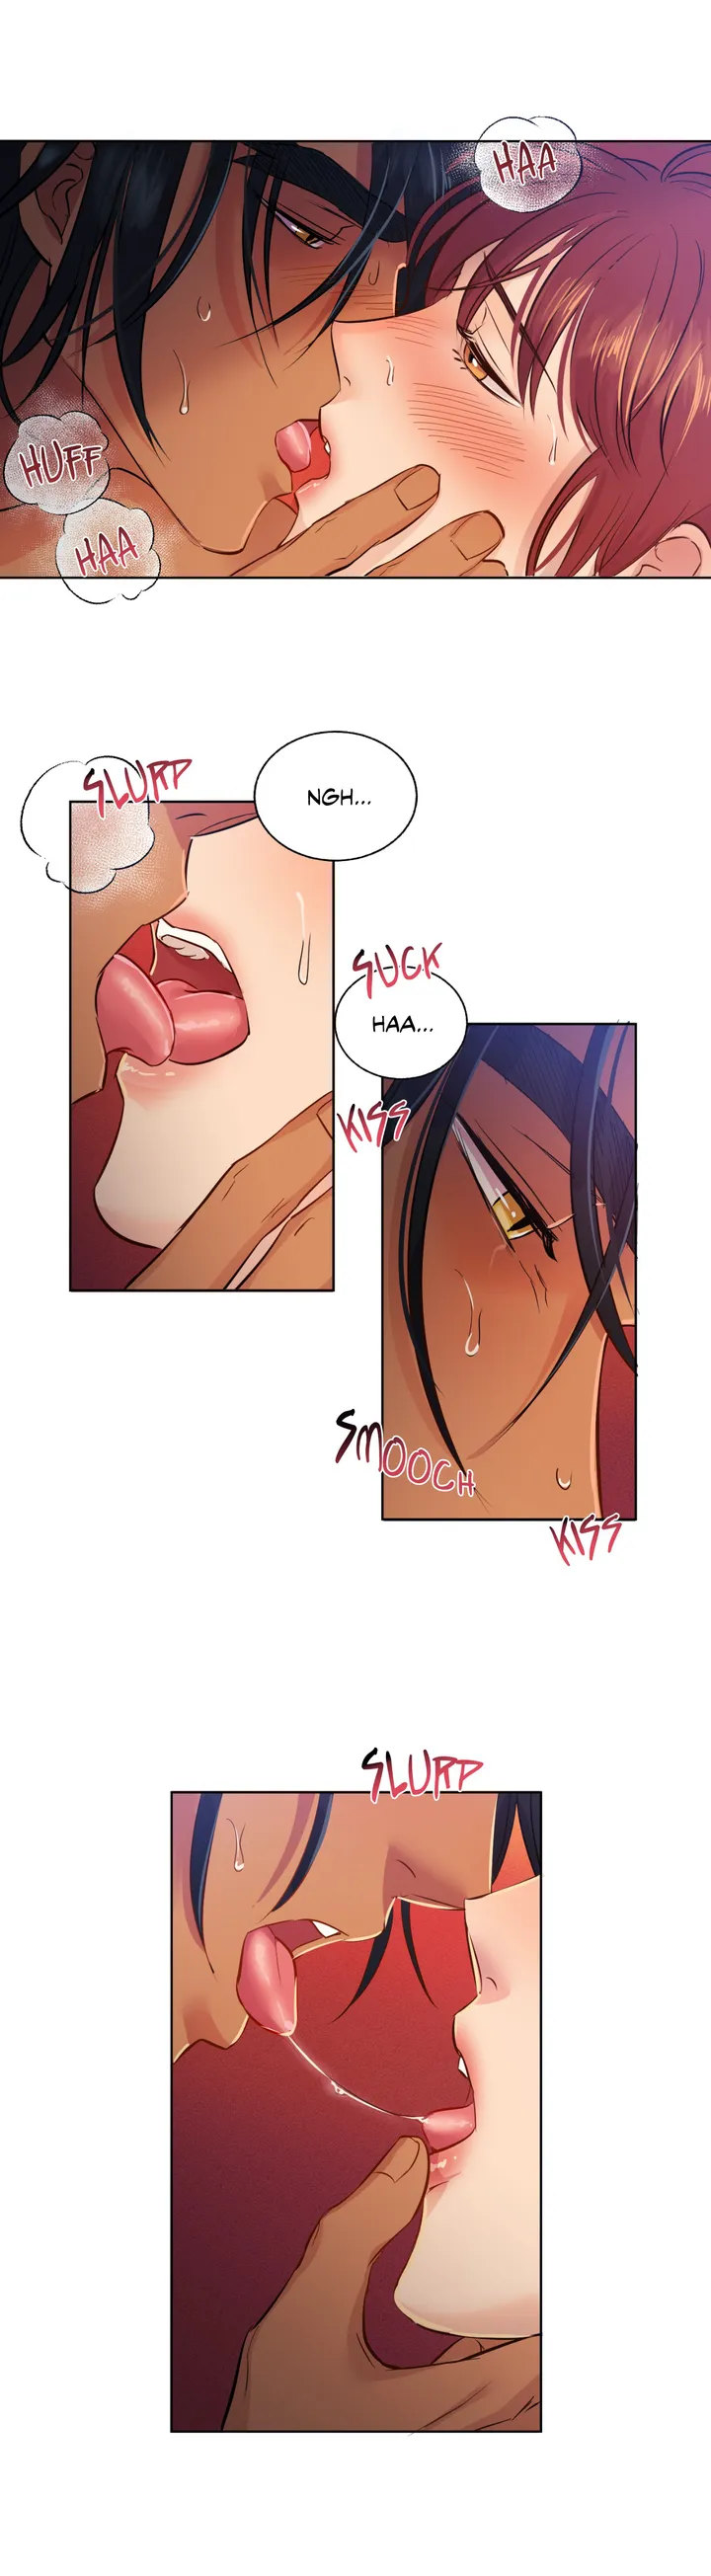 Hana’s Demons of Lust Chapter 1 - Page 4